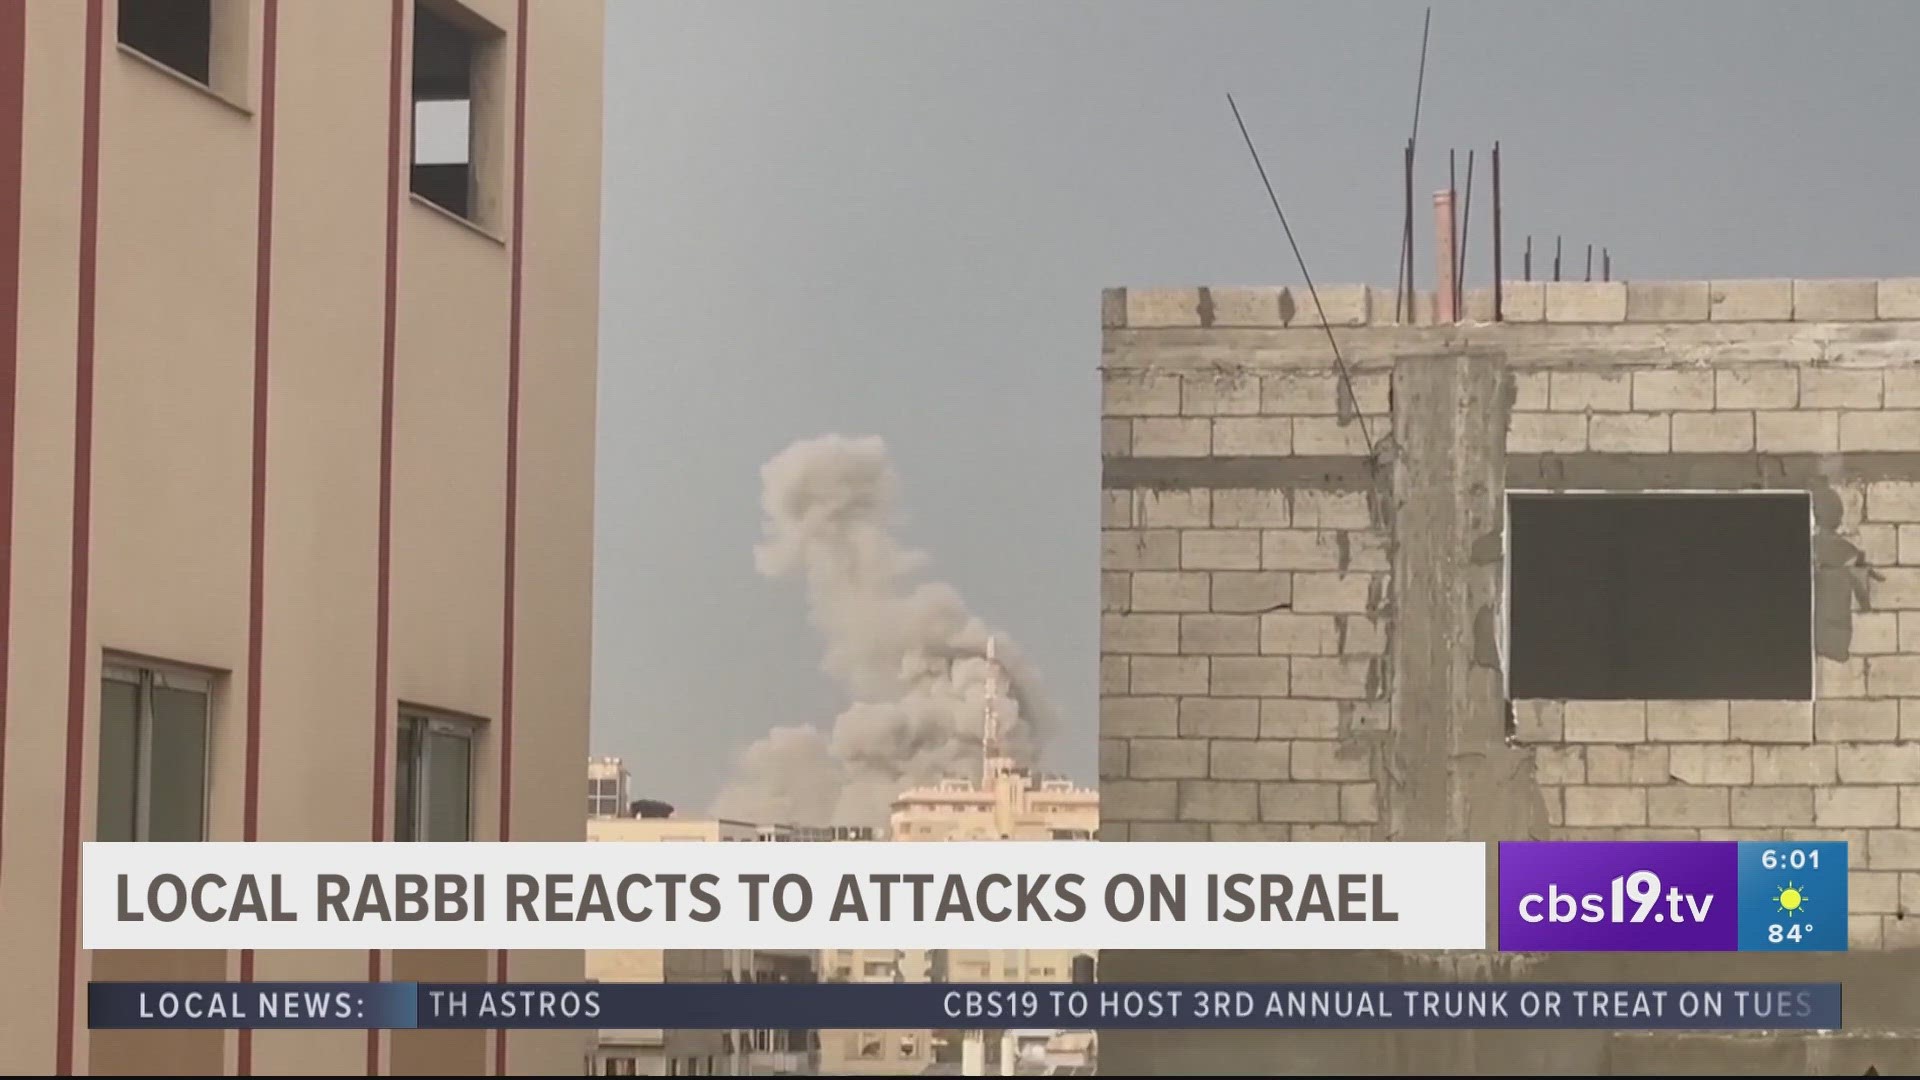 Katz describes the latest strike in the ongoing Israeli - Palestinian conflict, this weekend’s violent attack on Israel carried out by the terrorist group Hamas.